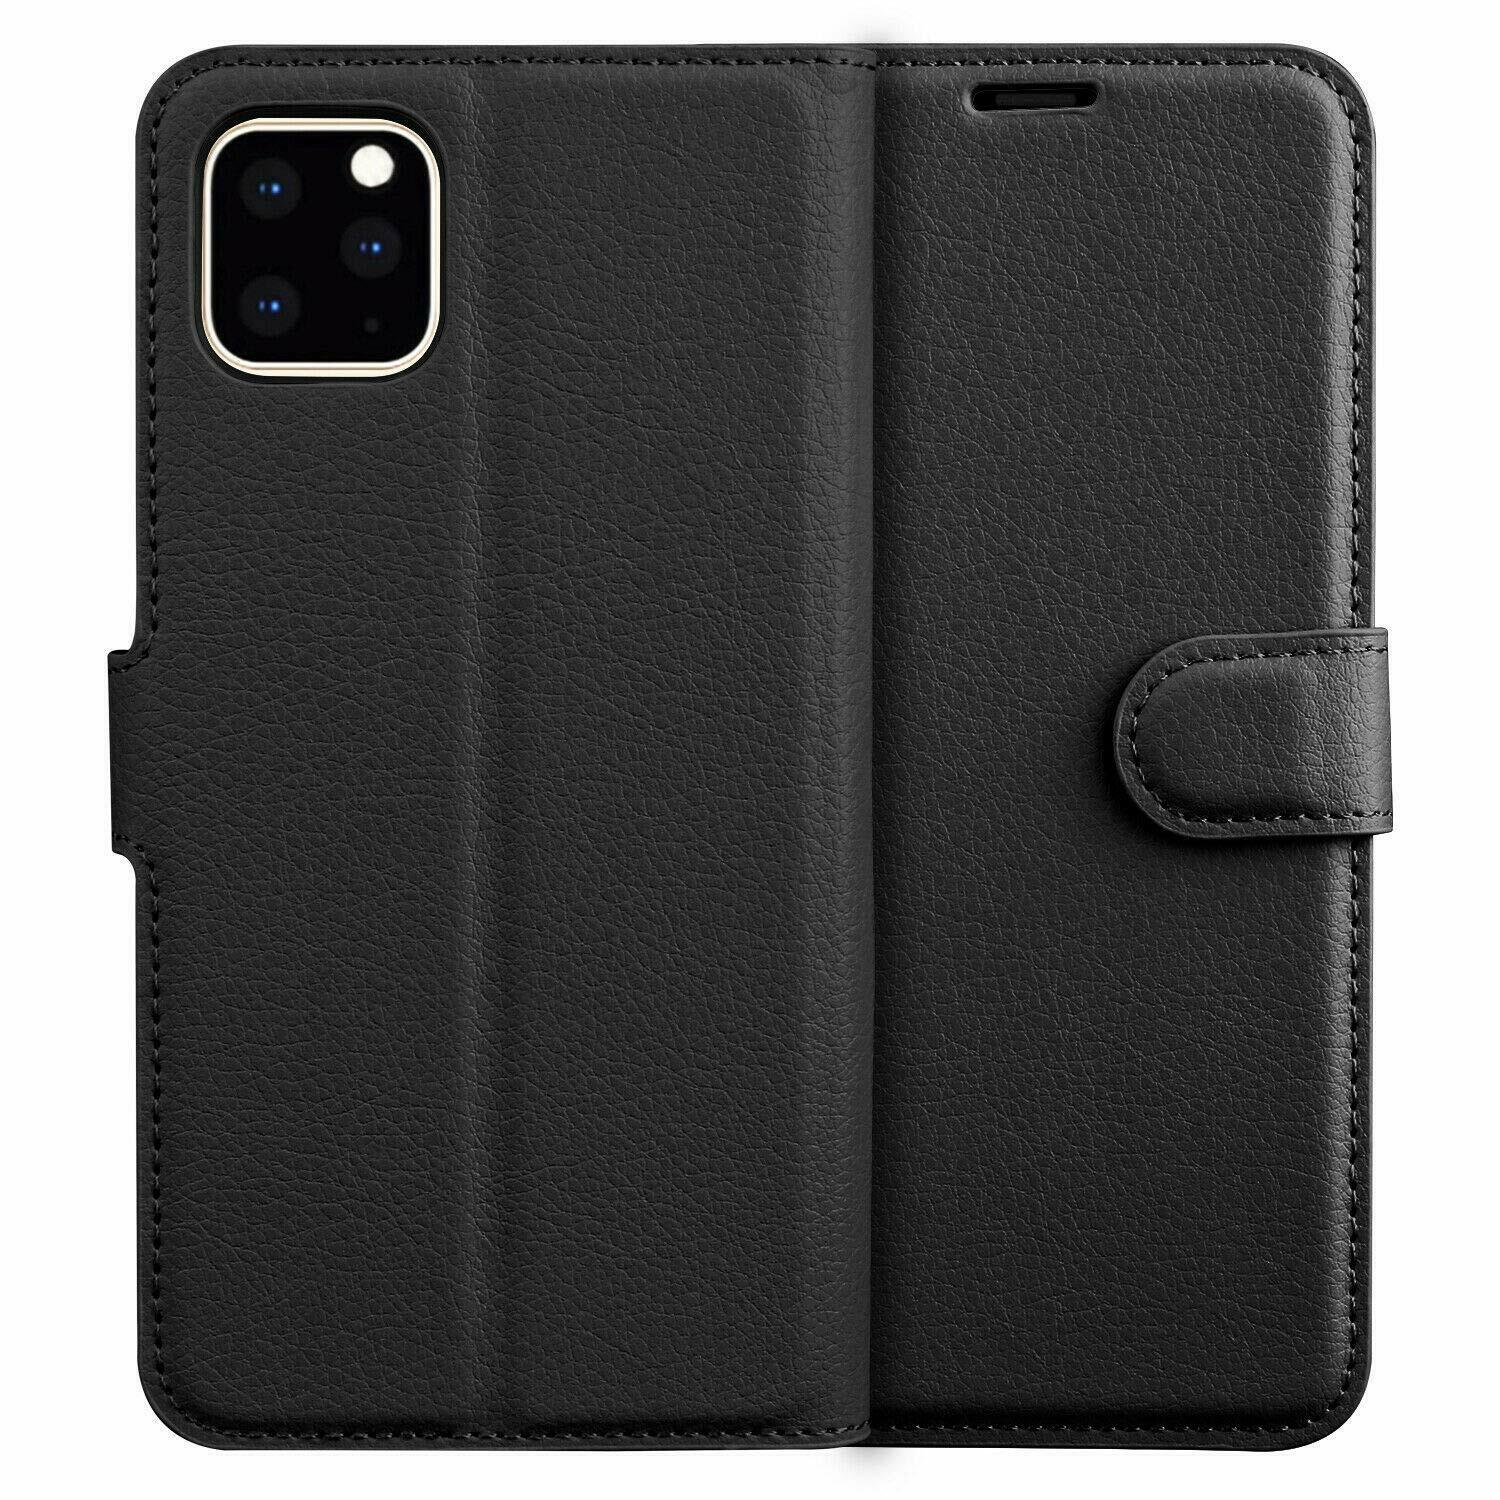 iPhone 12 PRO MAX 6.7” Leather Flip Wallet Case with Cash / Card Slots